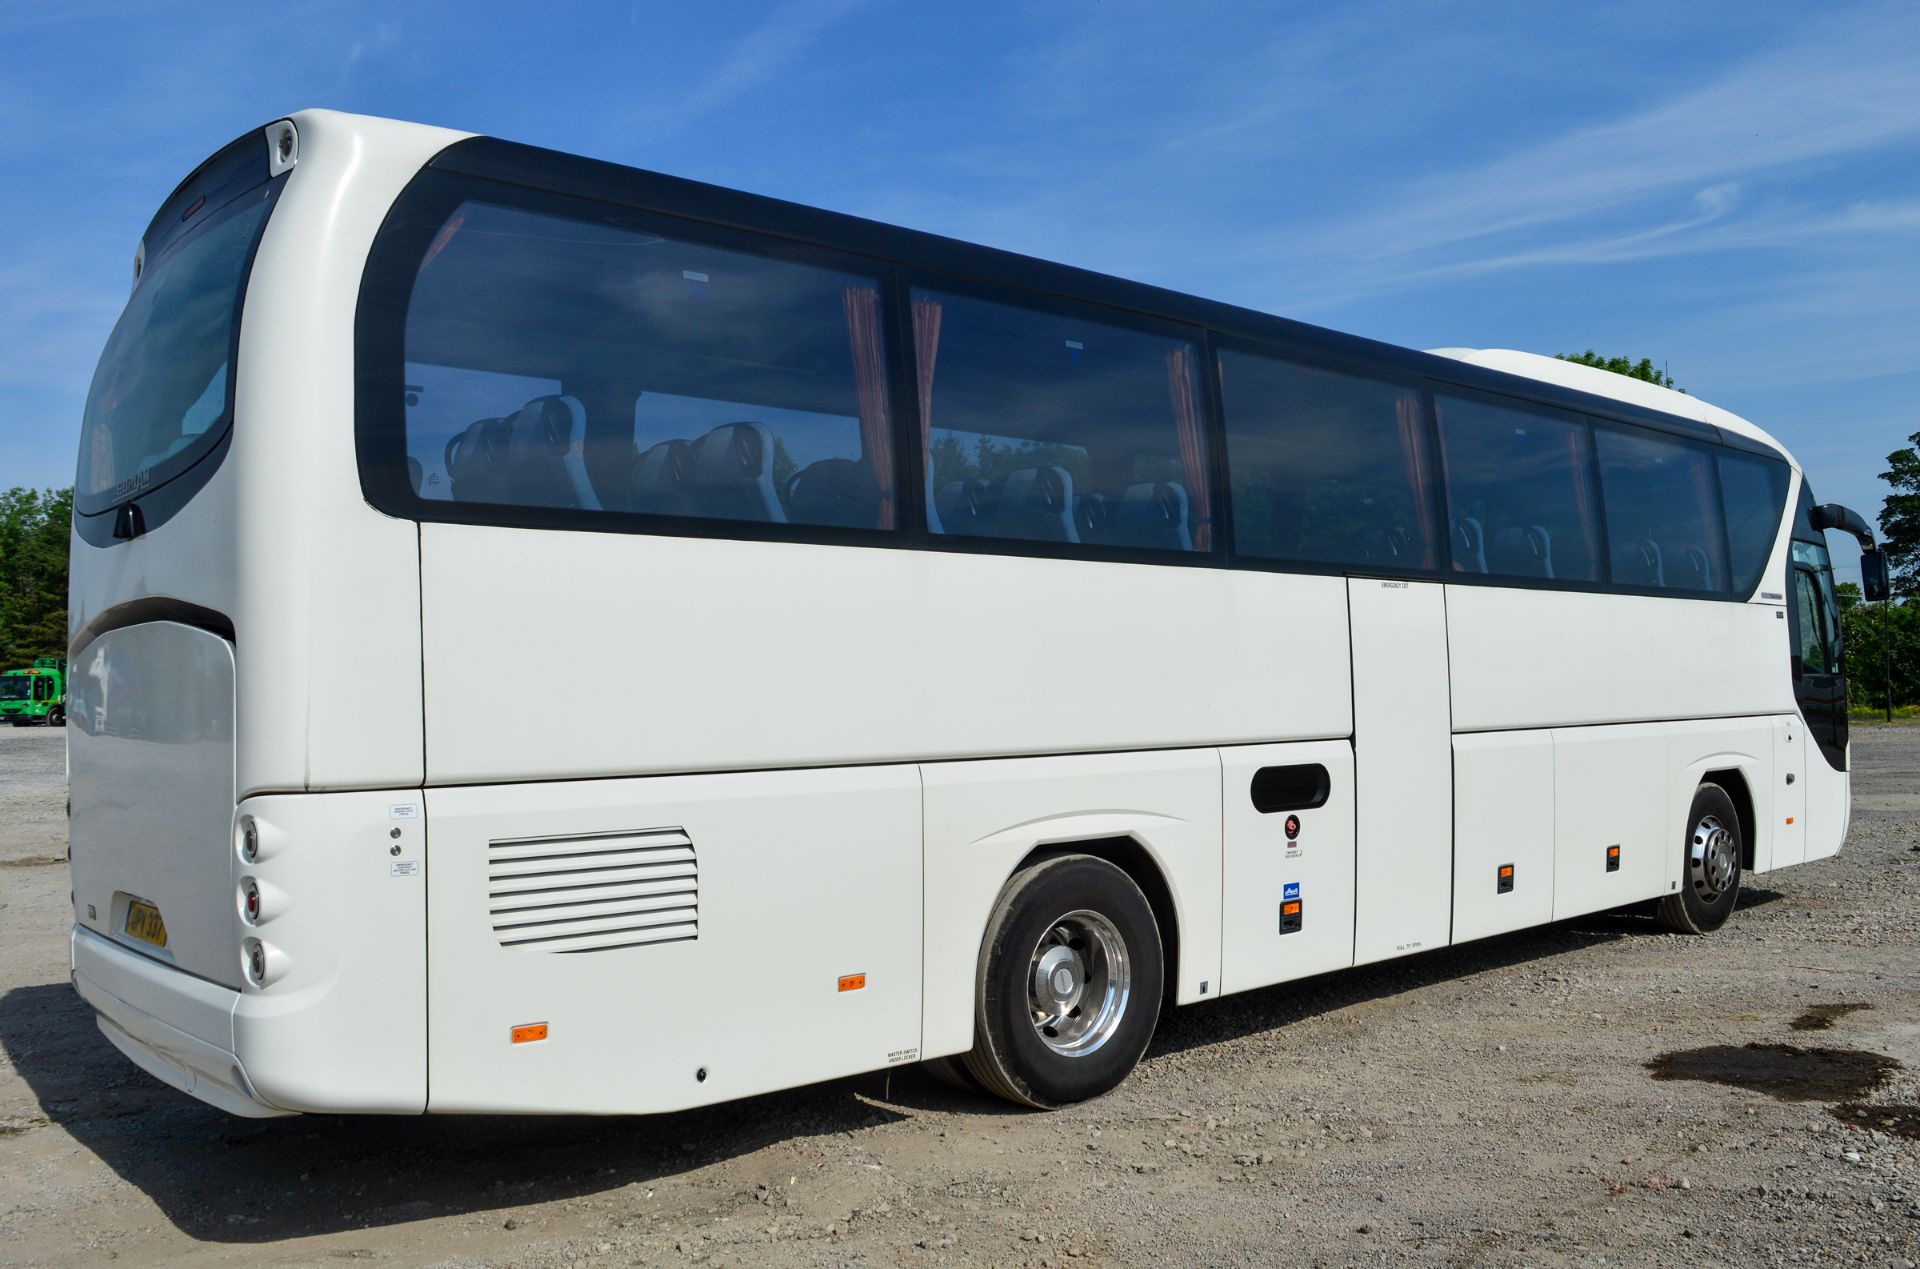 Neoplan Tourliner 49 seat luxury coach Registration Number: MJ11 KVG (UPV 337 has been retained) - Image 2 of 11